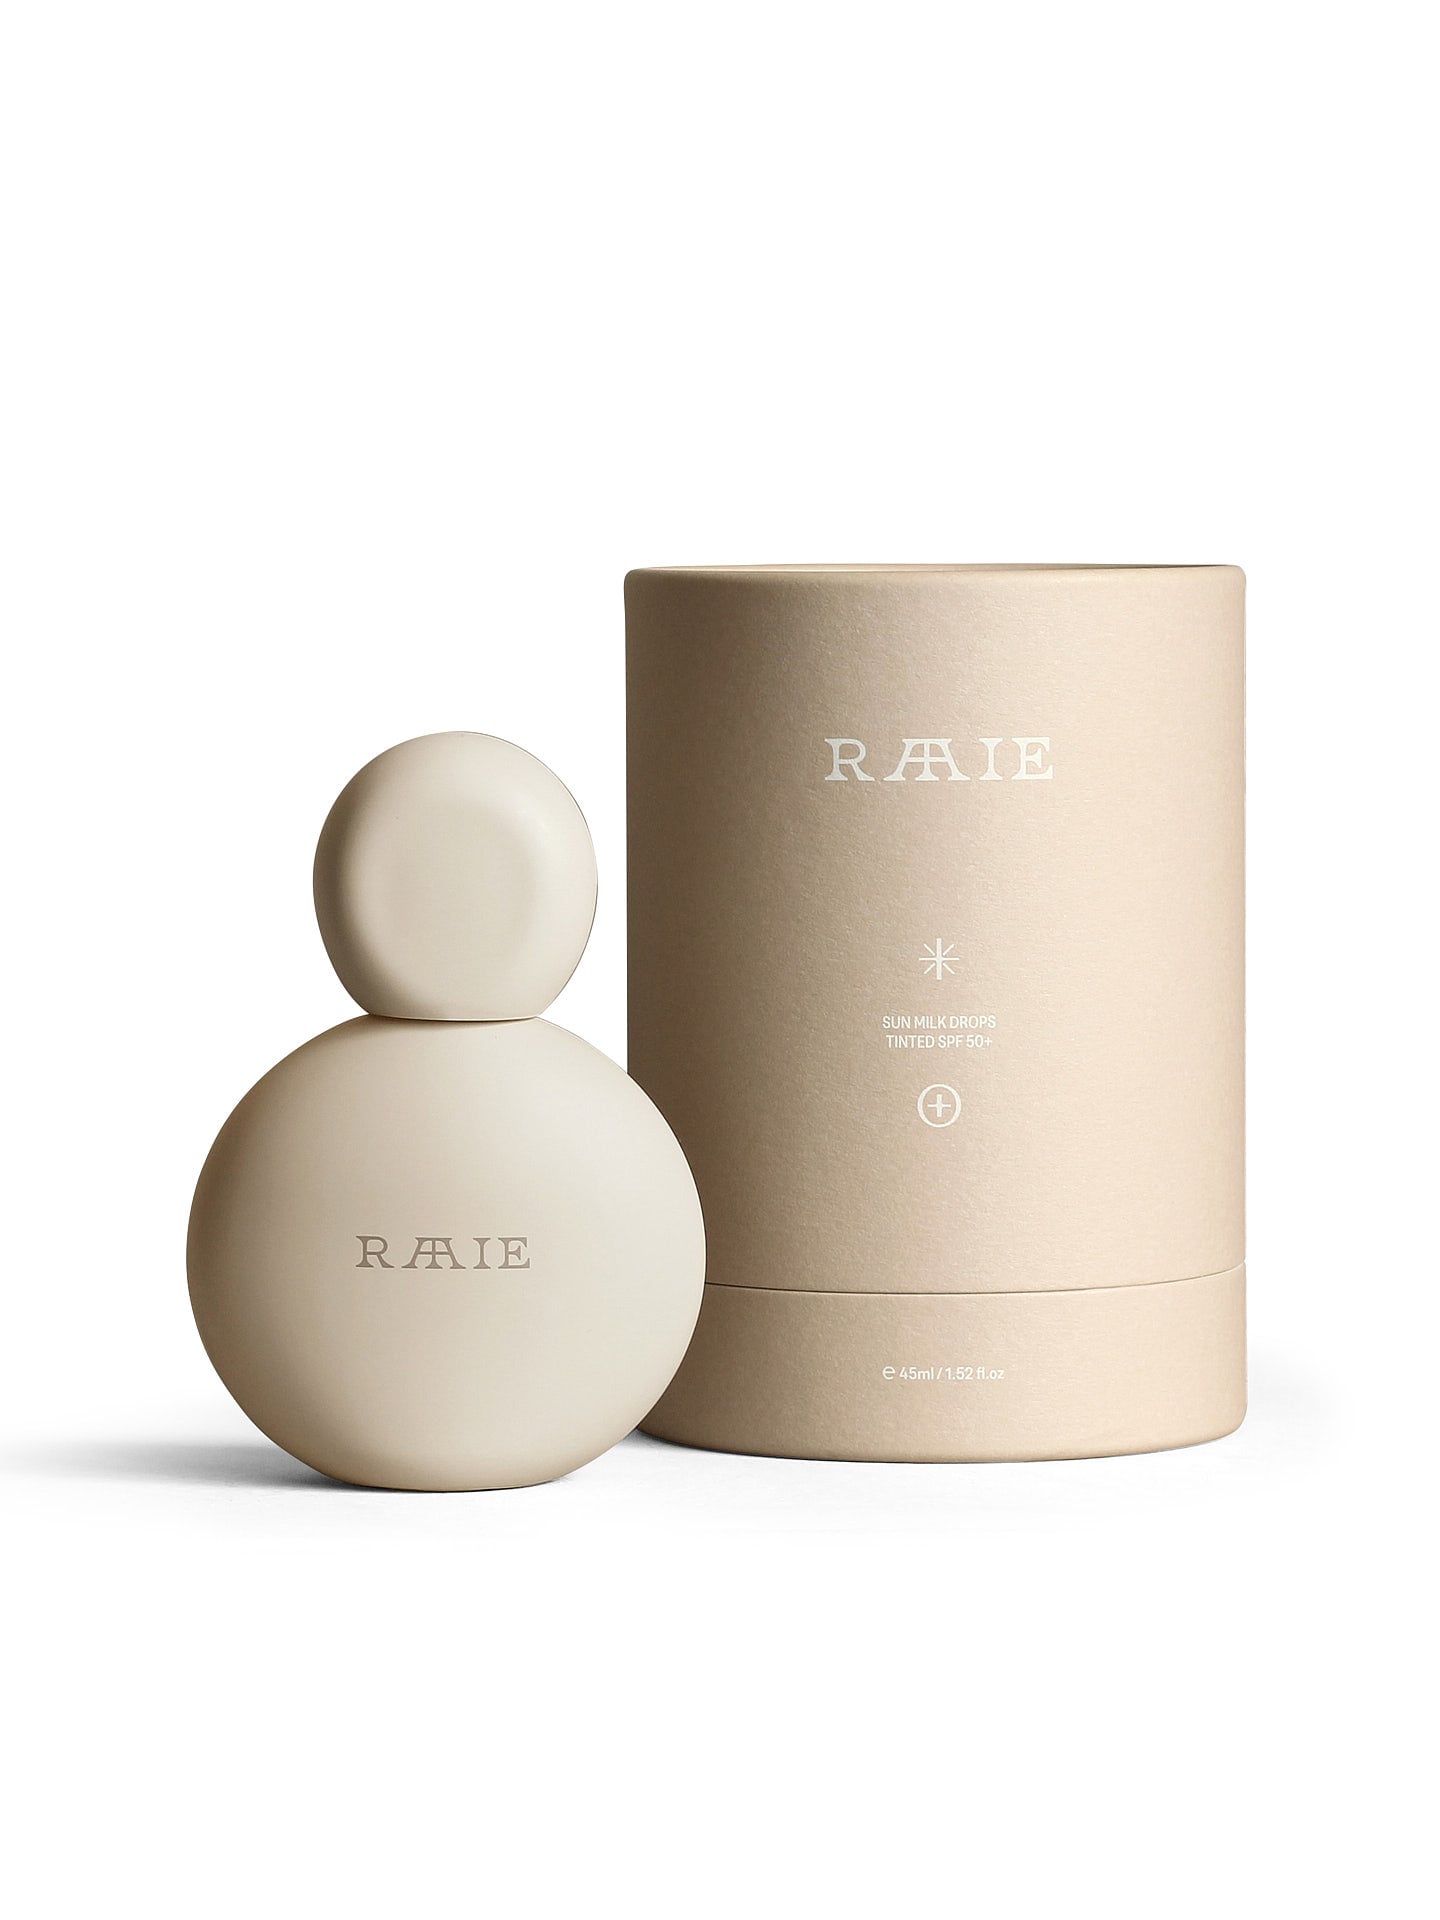 A beige, round perfume bottle with the brand name "RAAIE" embossed, standing next to a matching cylindrical container, evokes the elegance of Sun Milk Drops Tinted SPF 50+.